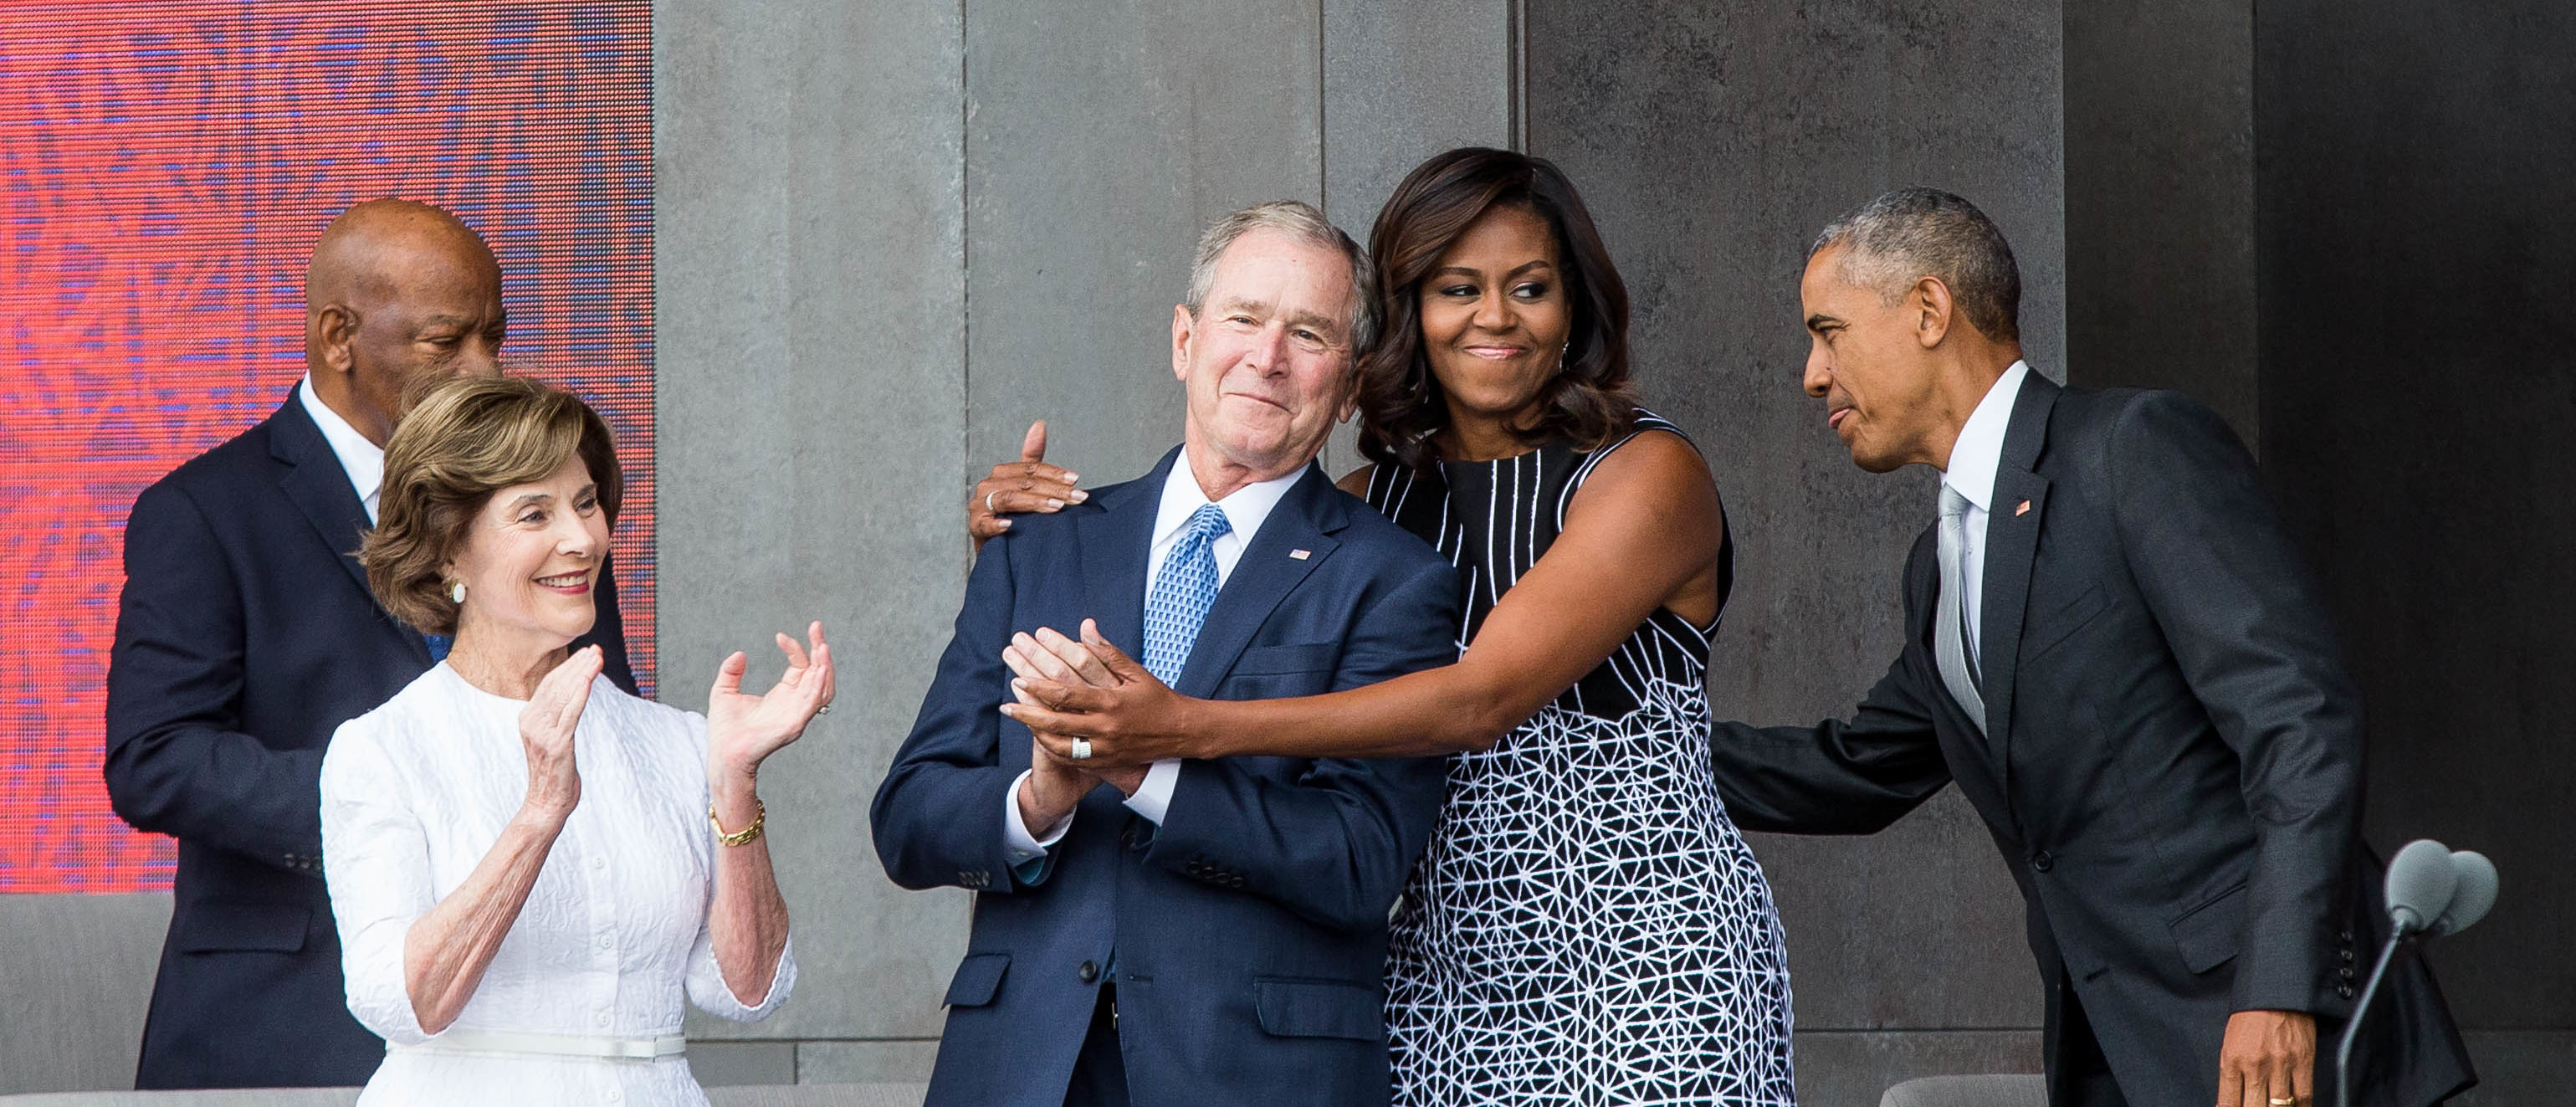 Michelle Obama Shares A Message Of Unity While Discussing Her Friendship With George W ...3079 x 1323